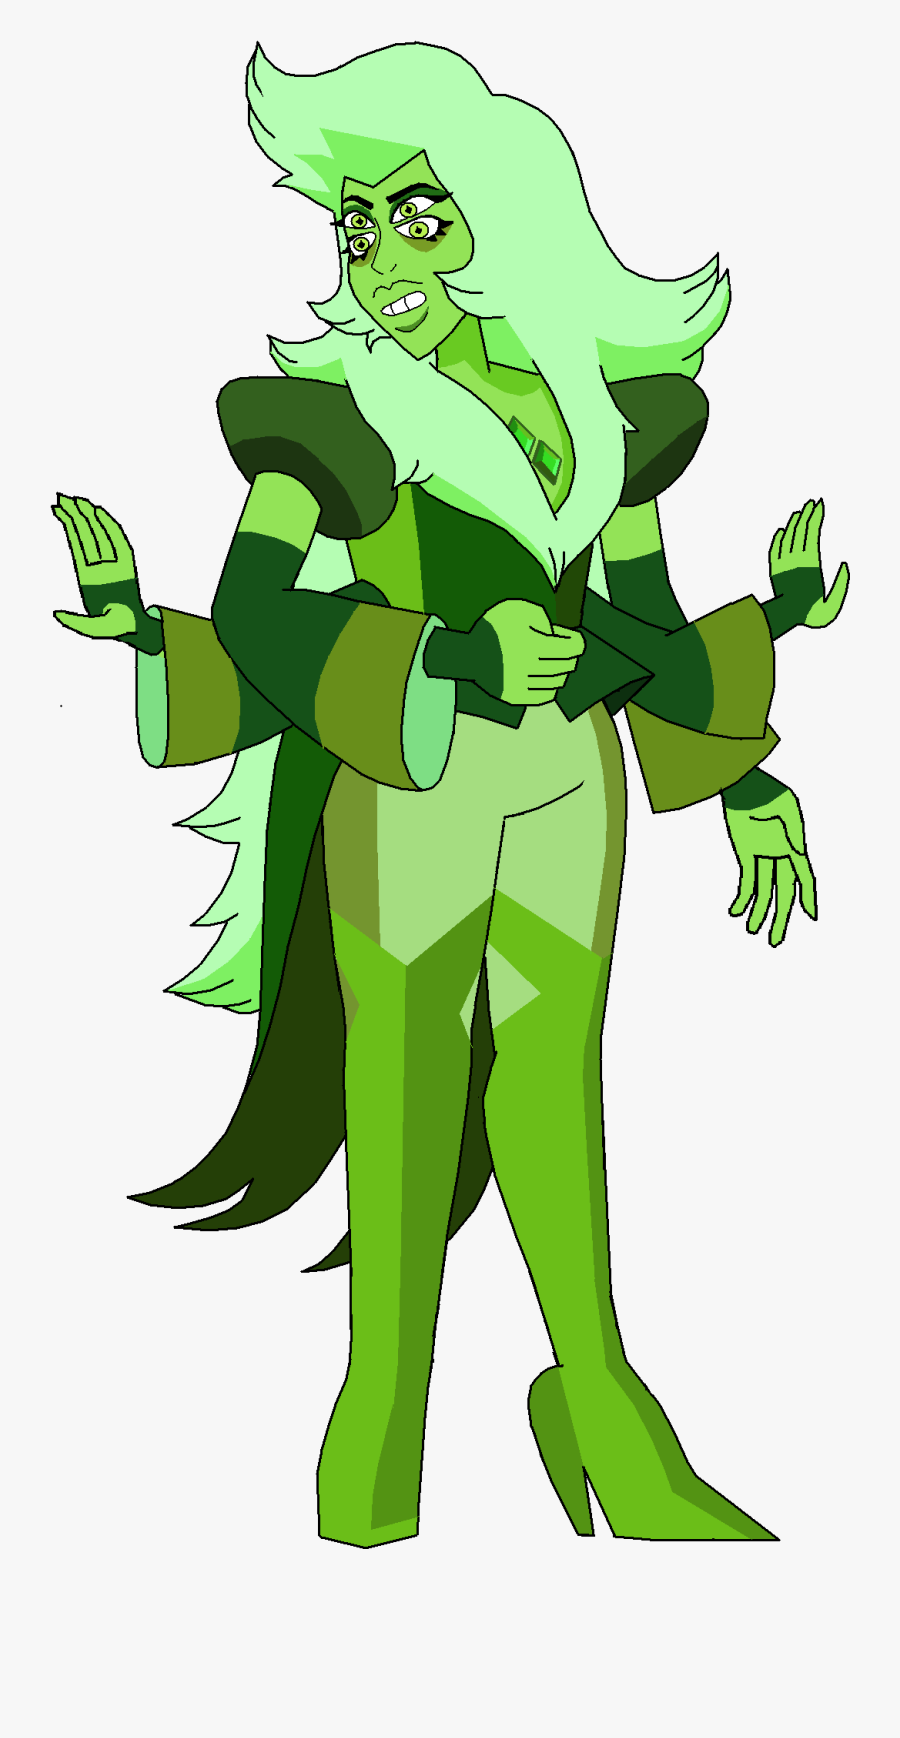 Transparent Thumbs Pointing To Self Clipart - Diamond Fusions Steven Universe, Transparent Clipart